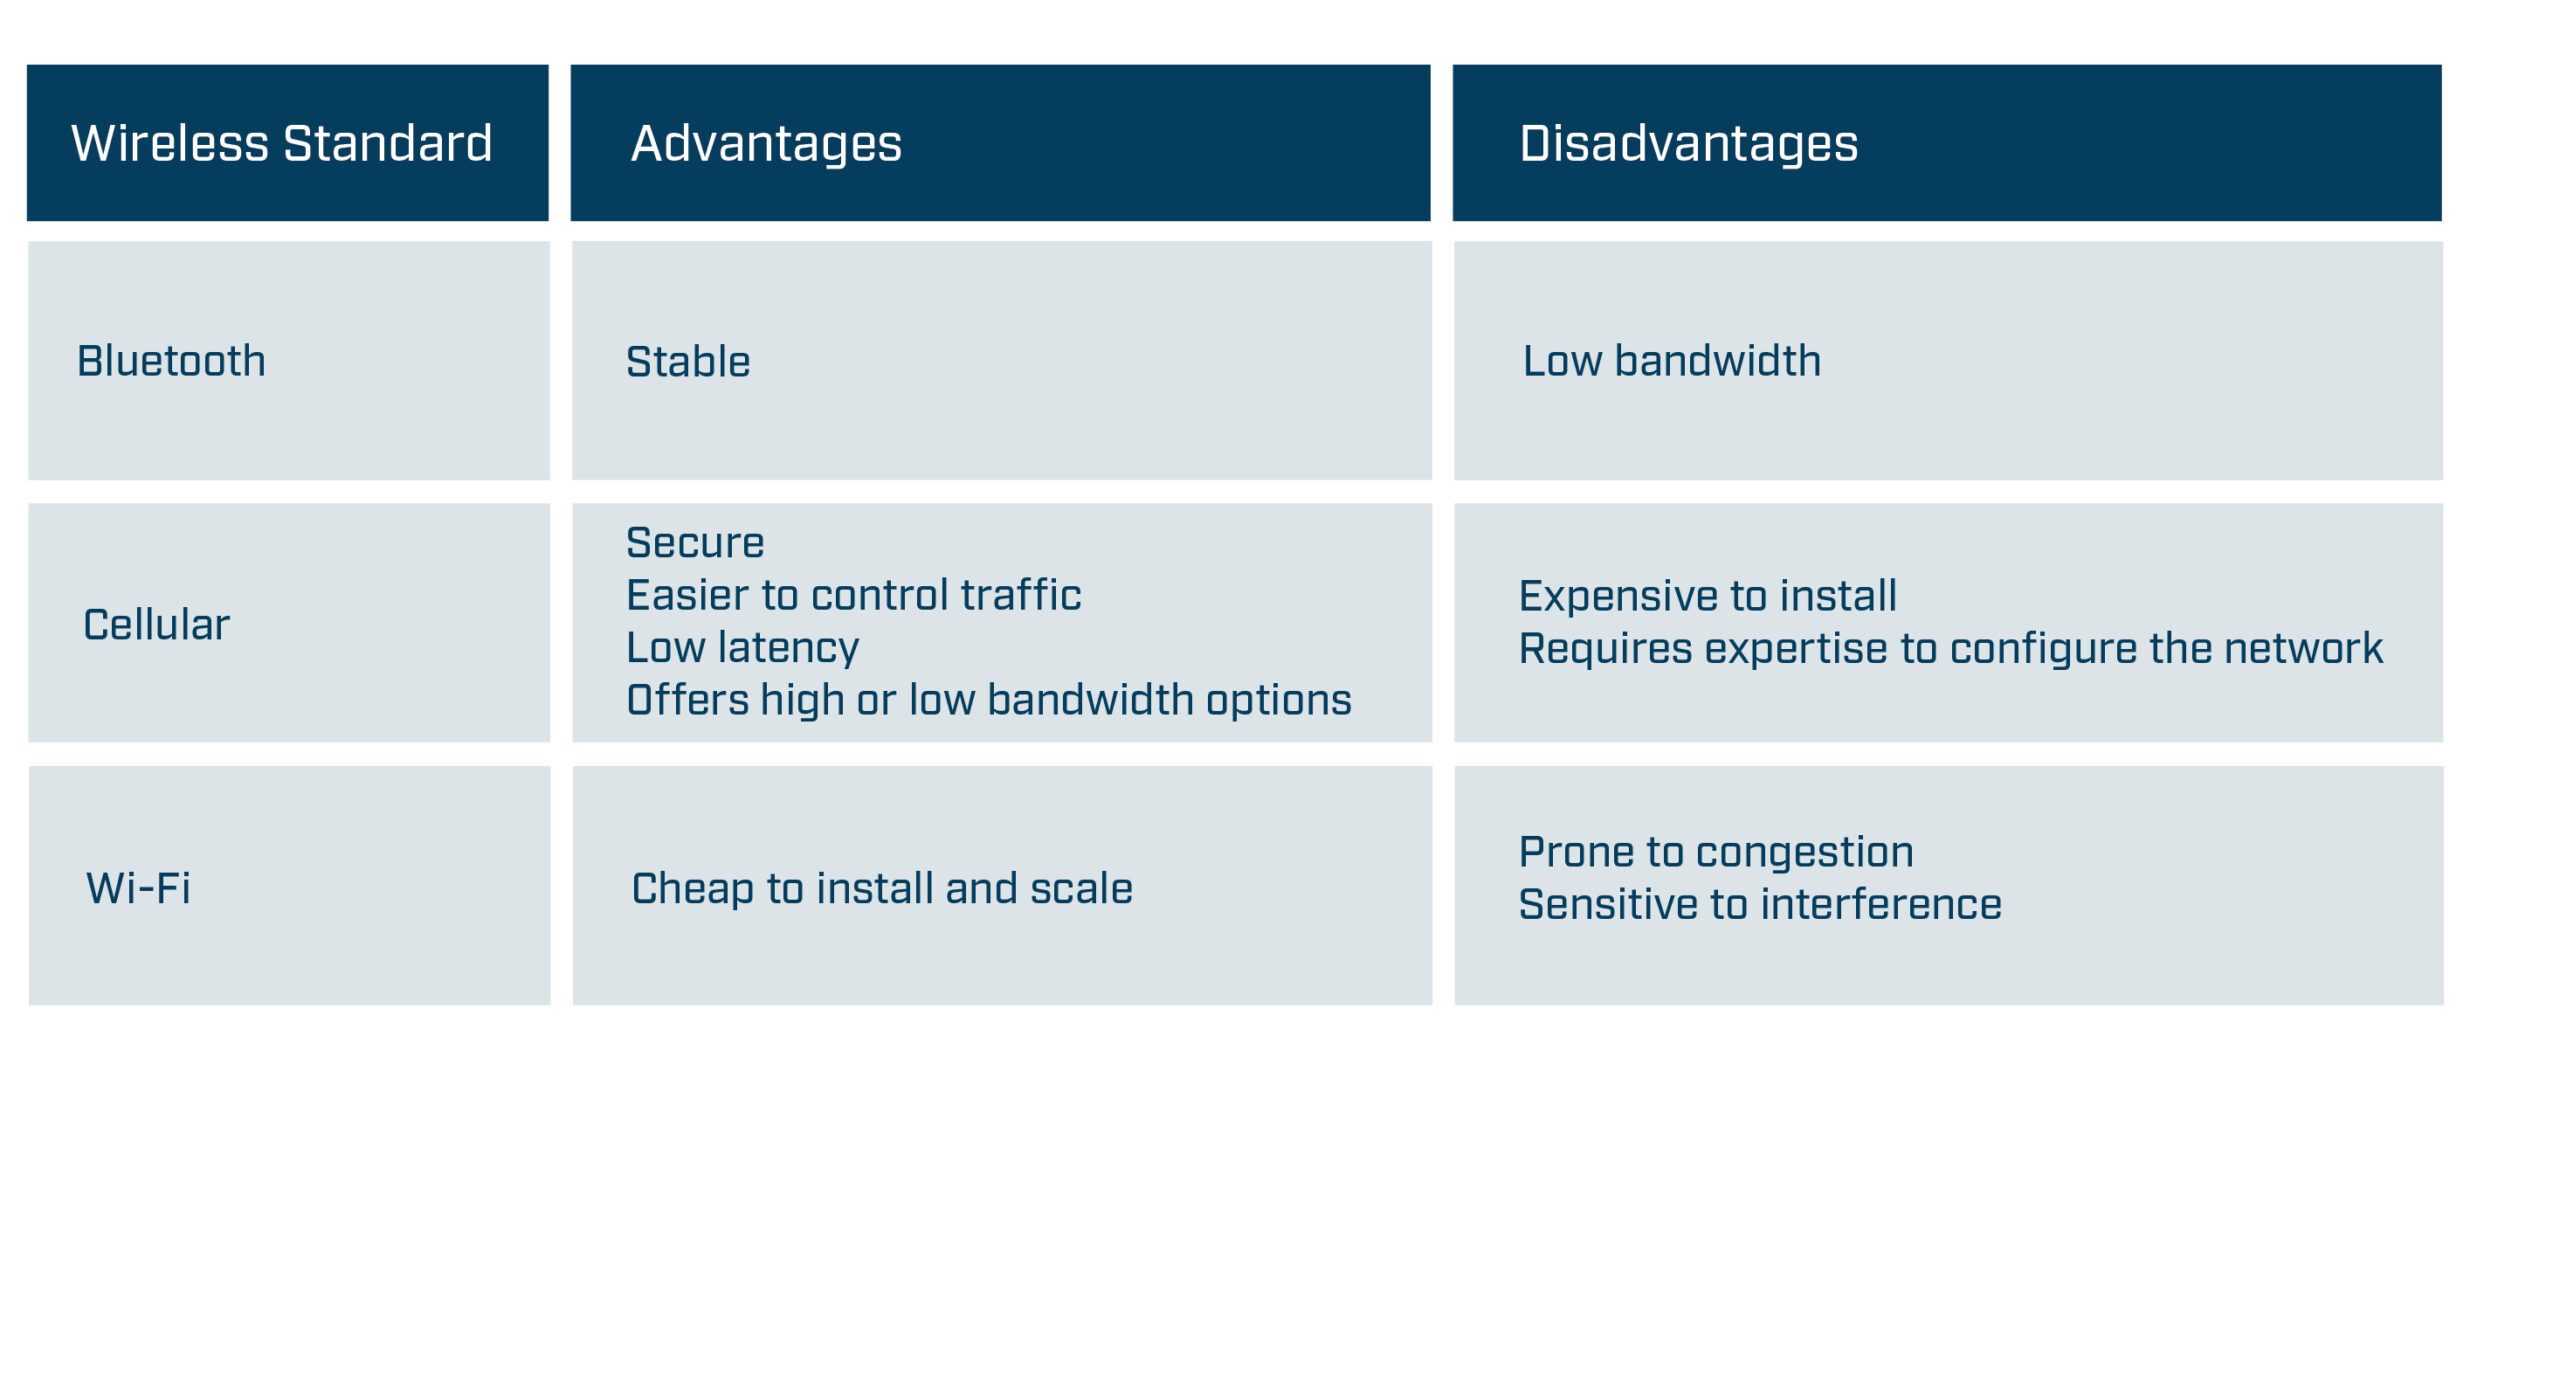 Figure 1. Wireless standard -high-level advantages and disadvantages